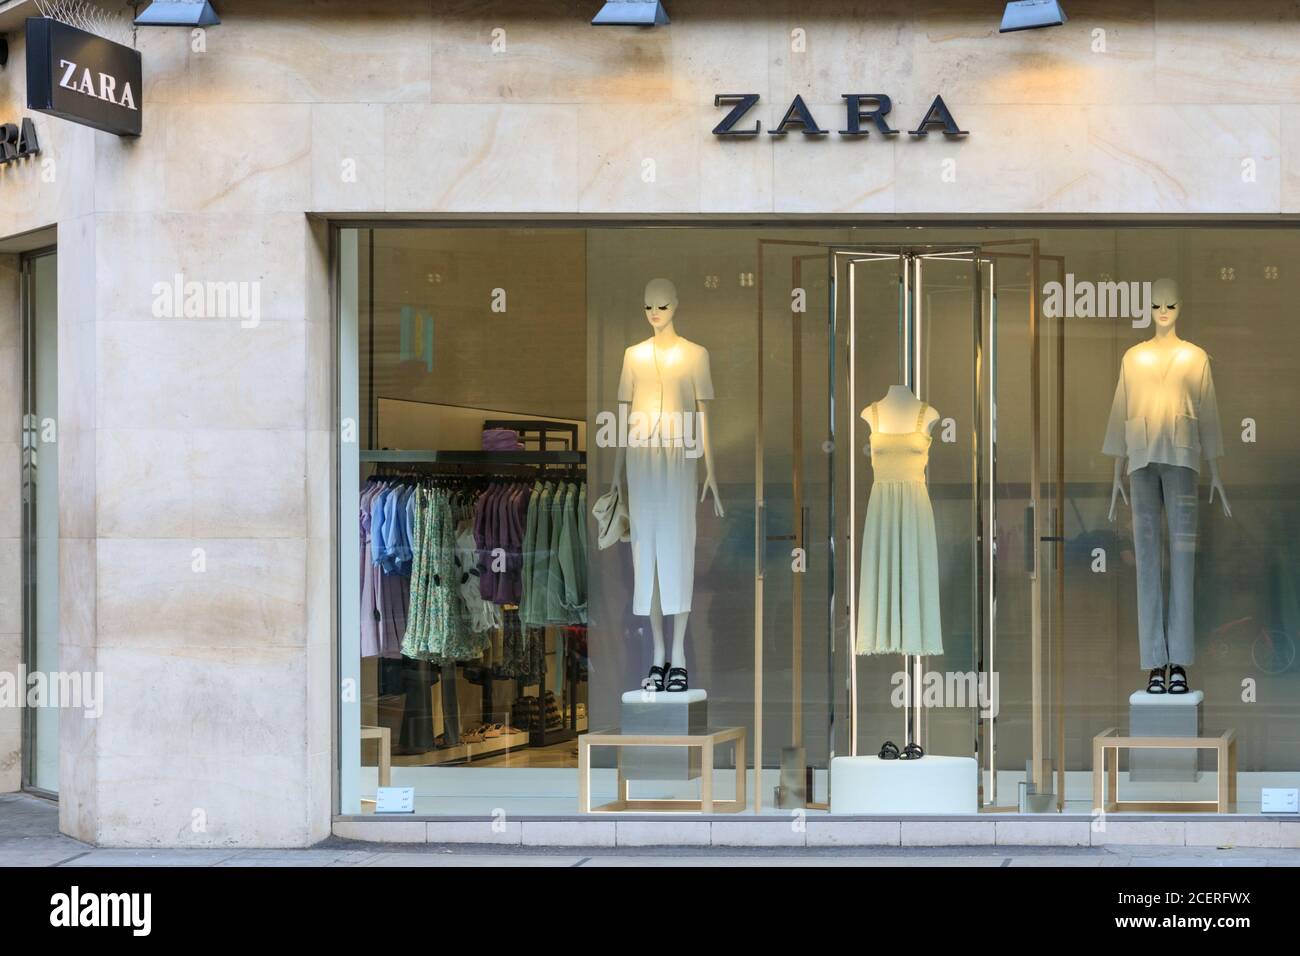 Zara clothing chain store and shop ...